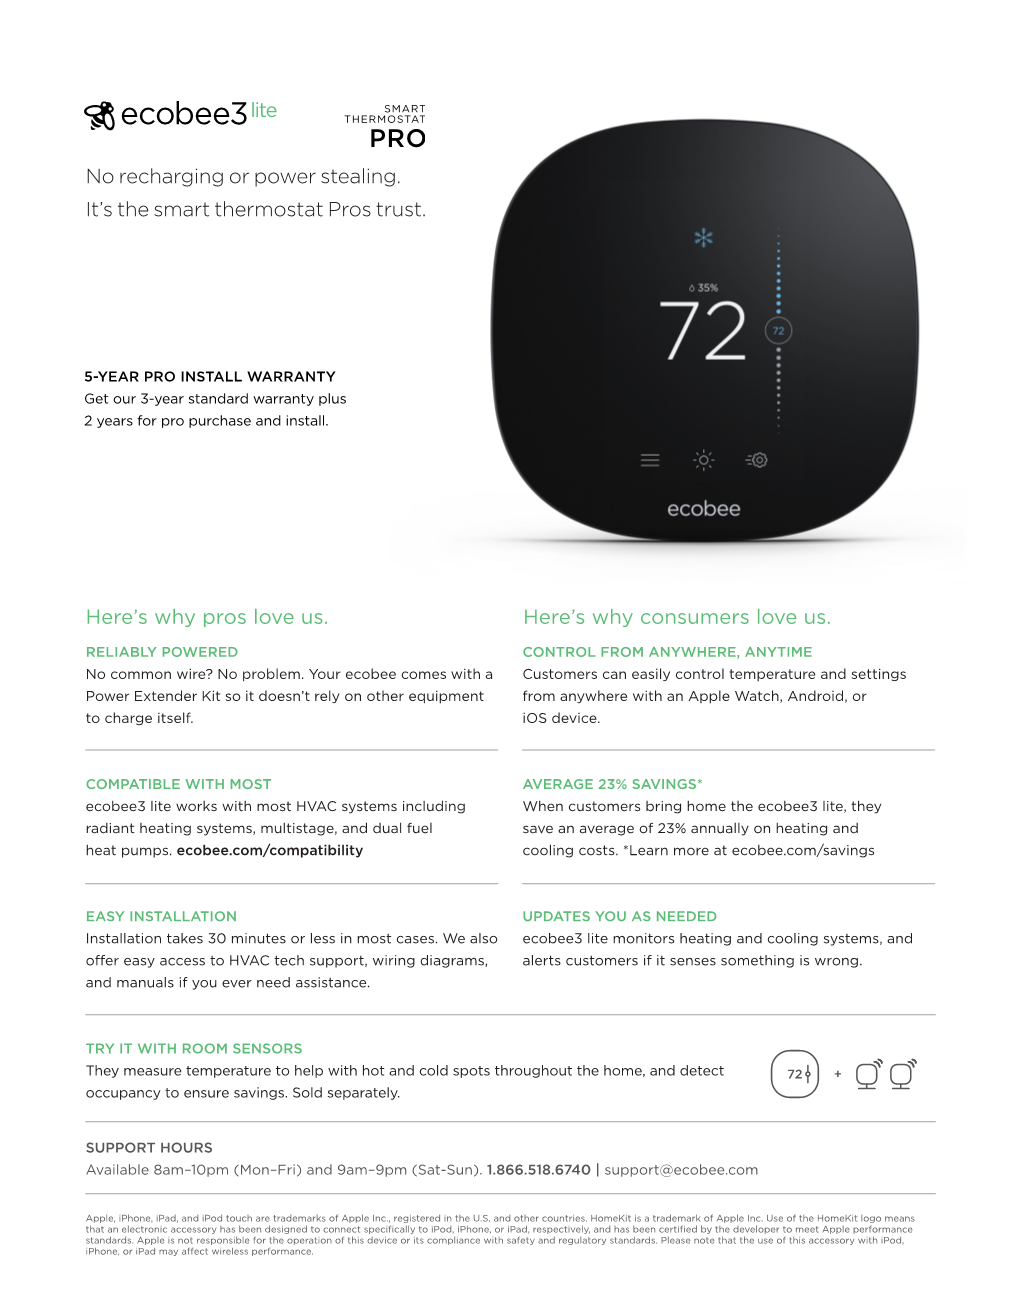 No Recharging Or Power Stealing. It's the Smart Thermostat Pros